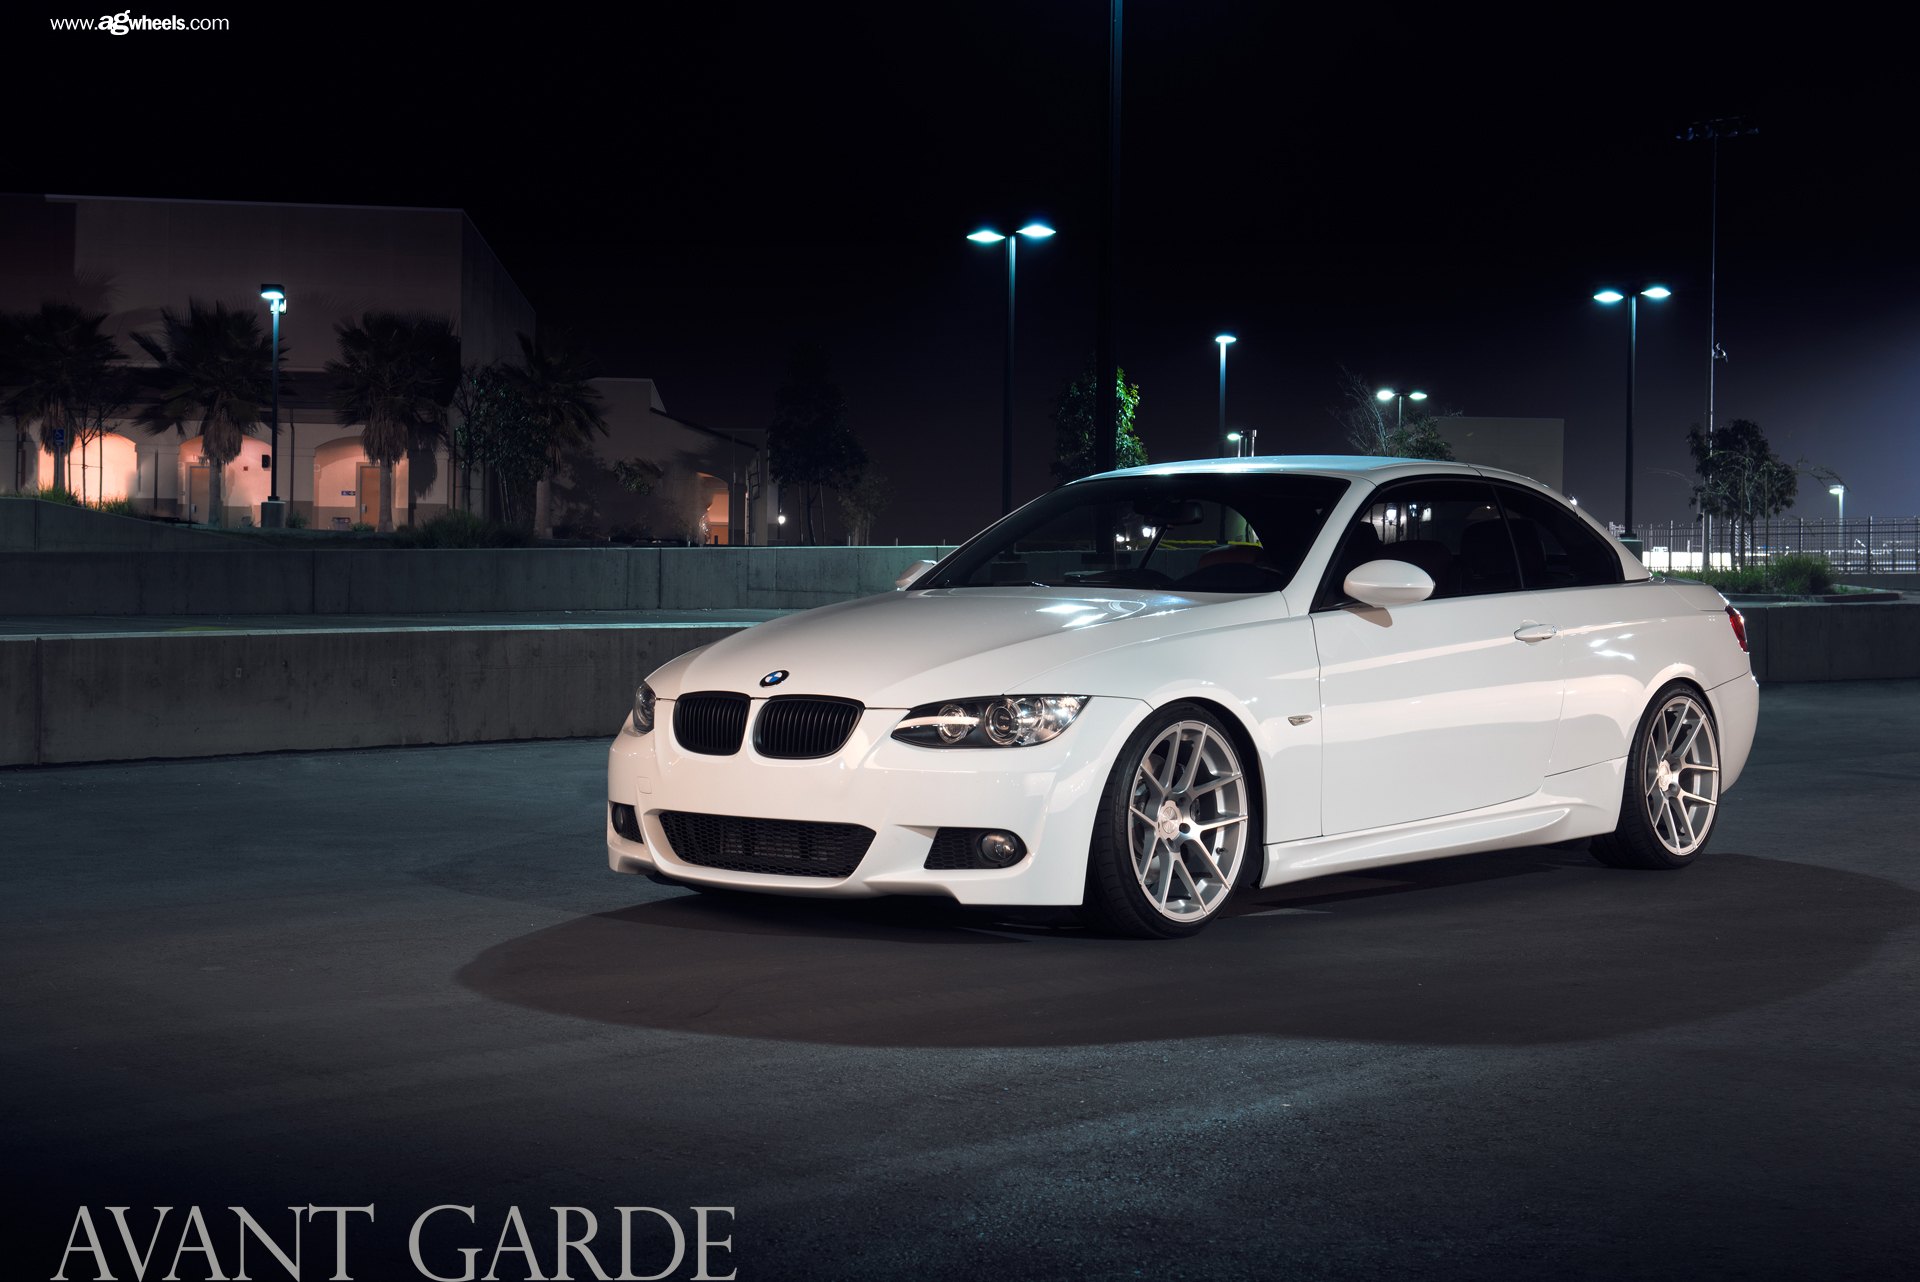 Aftermarket Front Bumper on White BMW 3-Series - Photo by Avant Garde Wheels